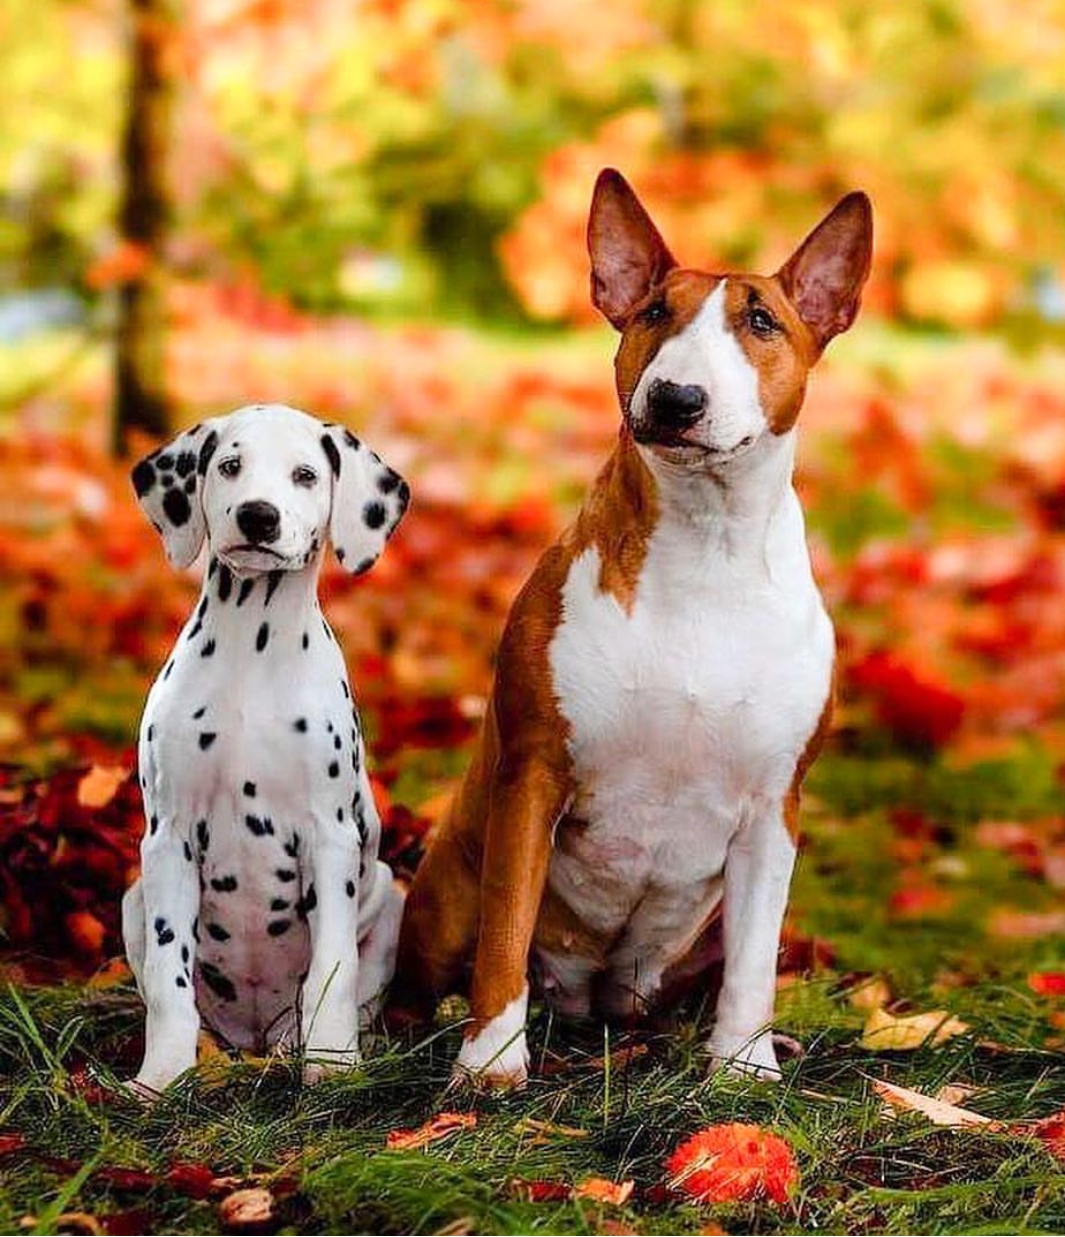 English Bull Terrier sitting on the grass with dried leaves beside a dalmatian puppy